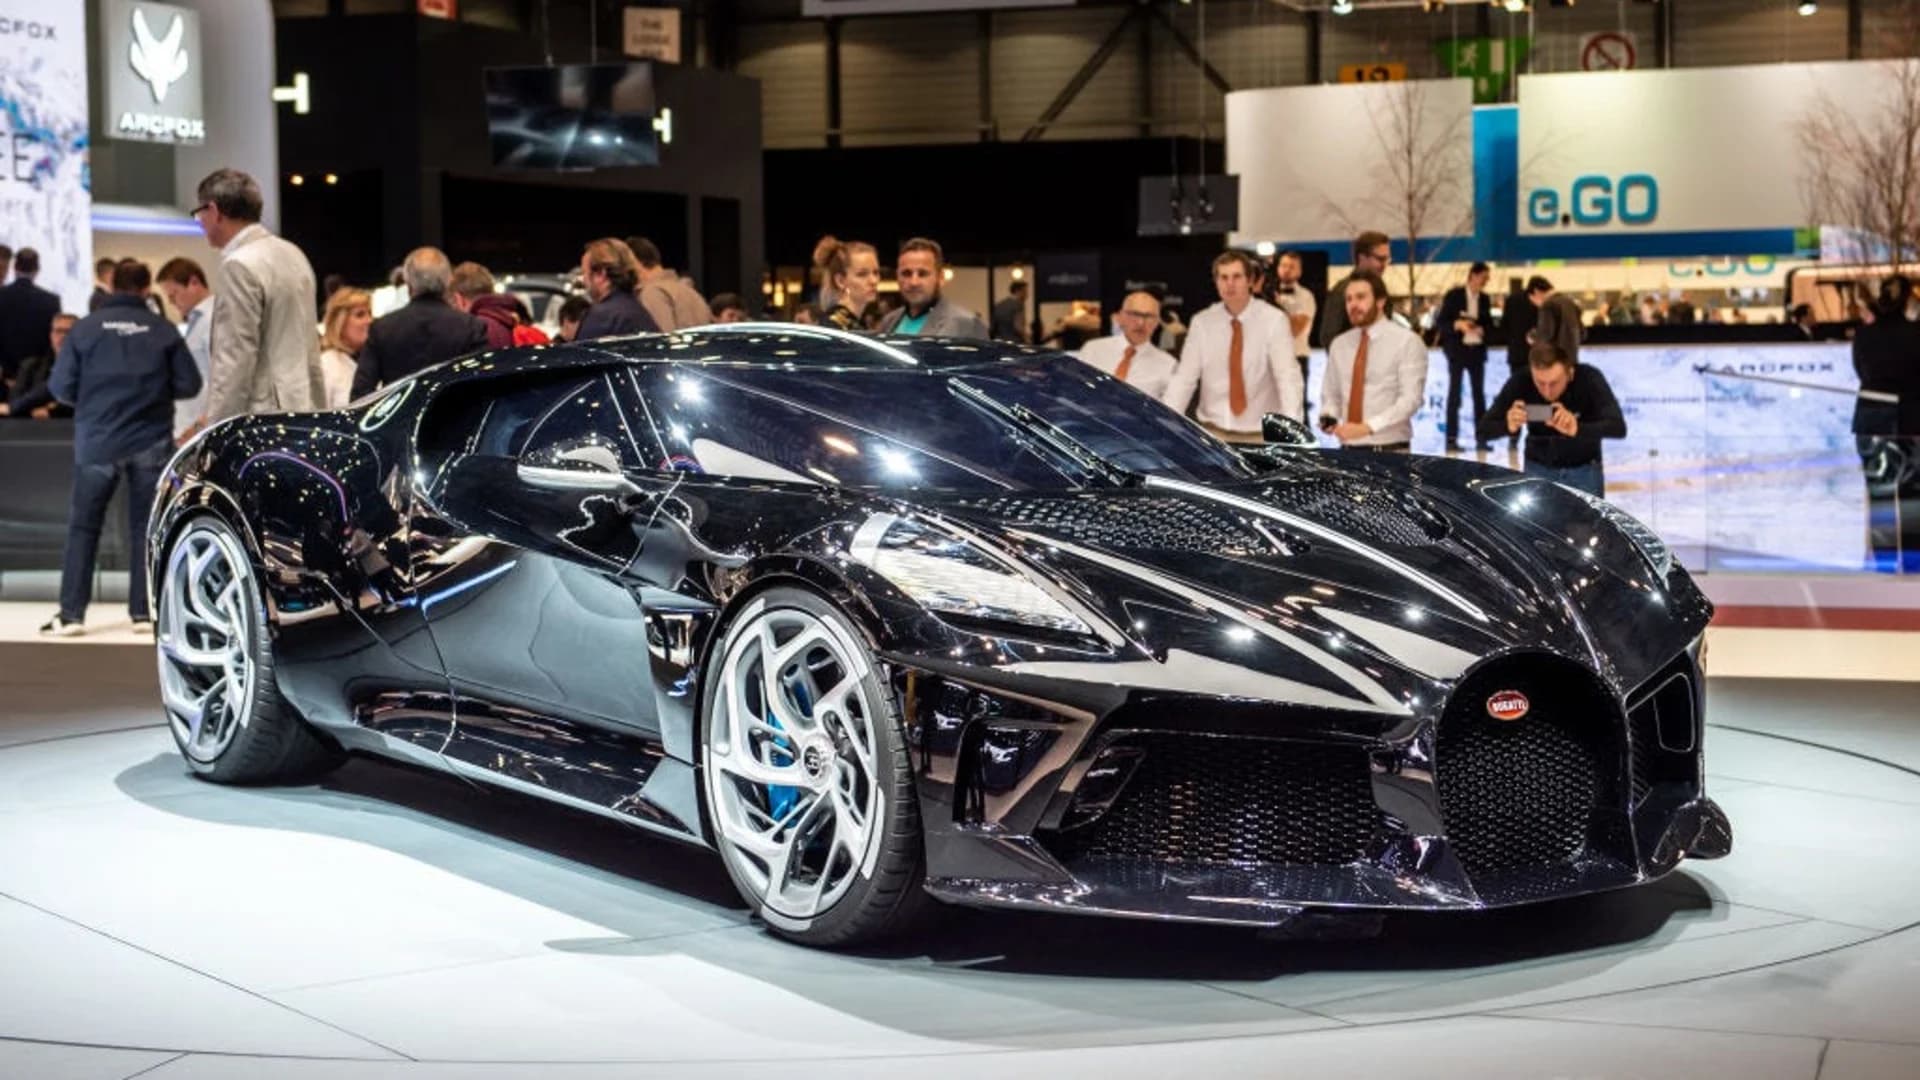 Most expensive new car ever: Bugatti sells for $19 million